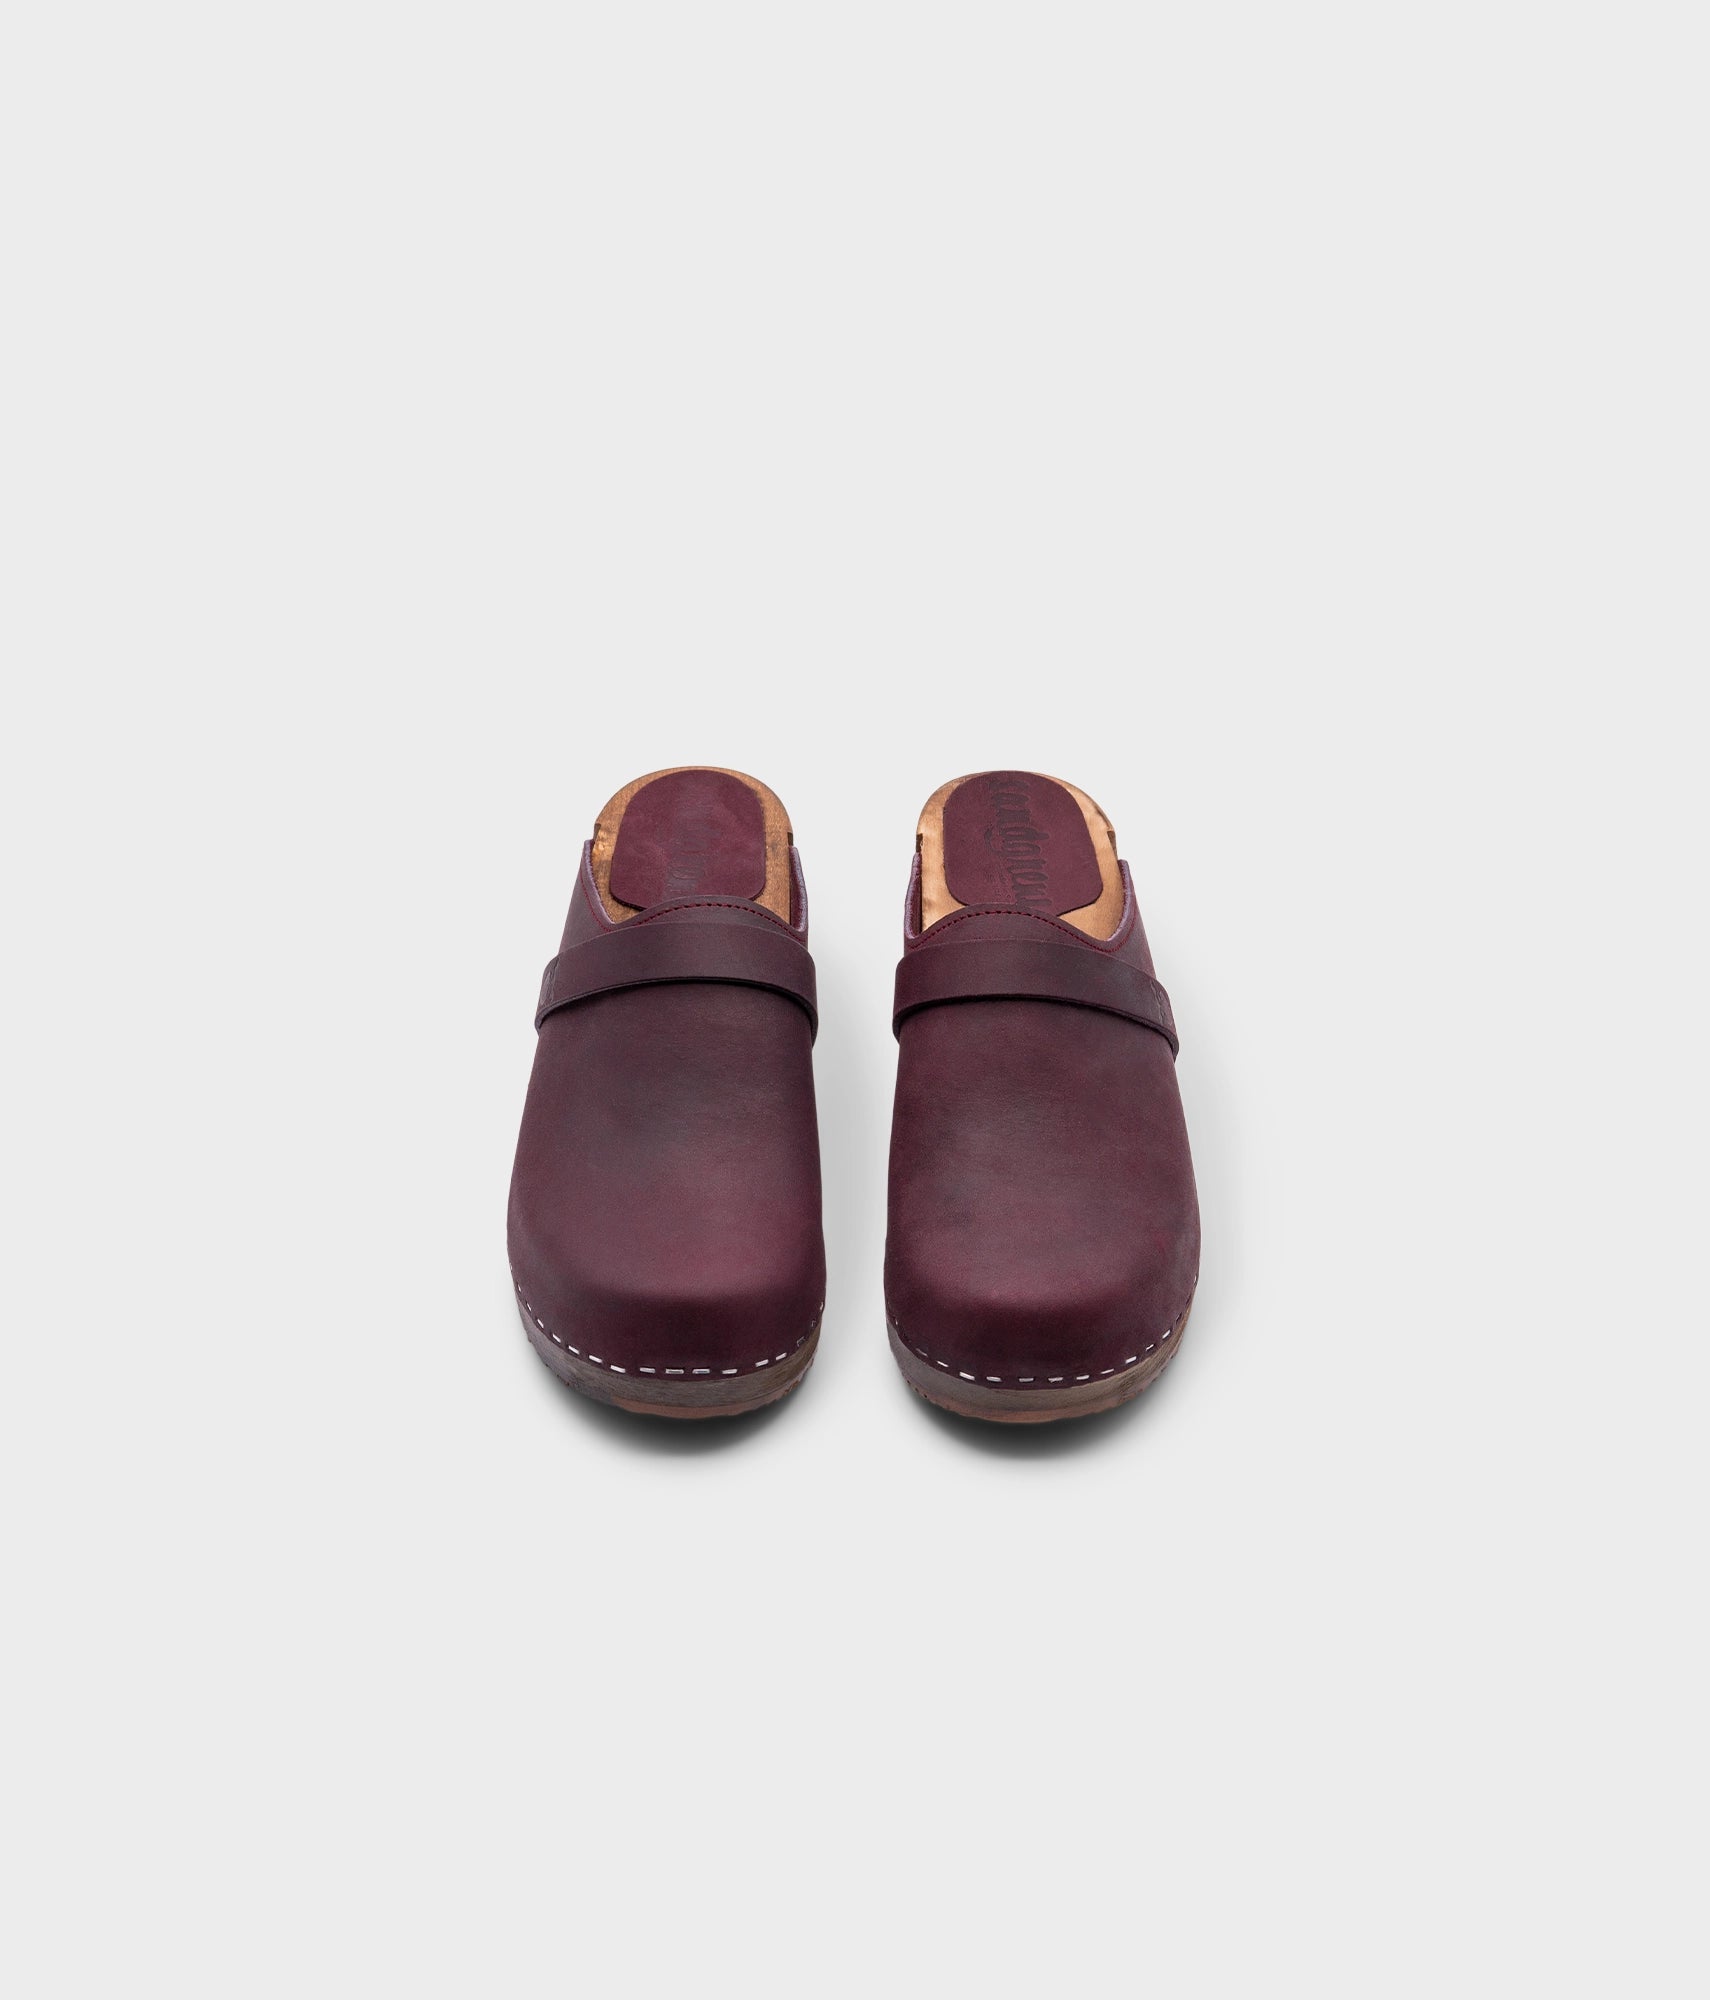 classic low heeled clog mule in plum purple nubuck leather stapled on a dark wooden base with a leather strap